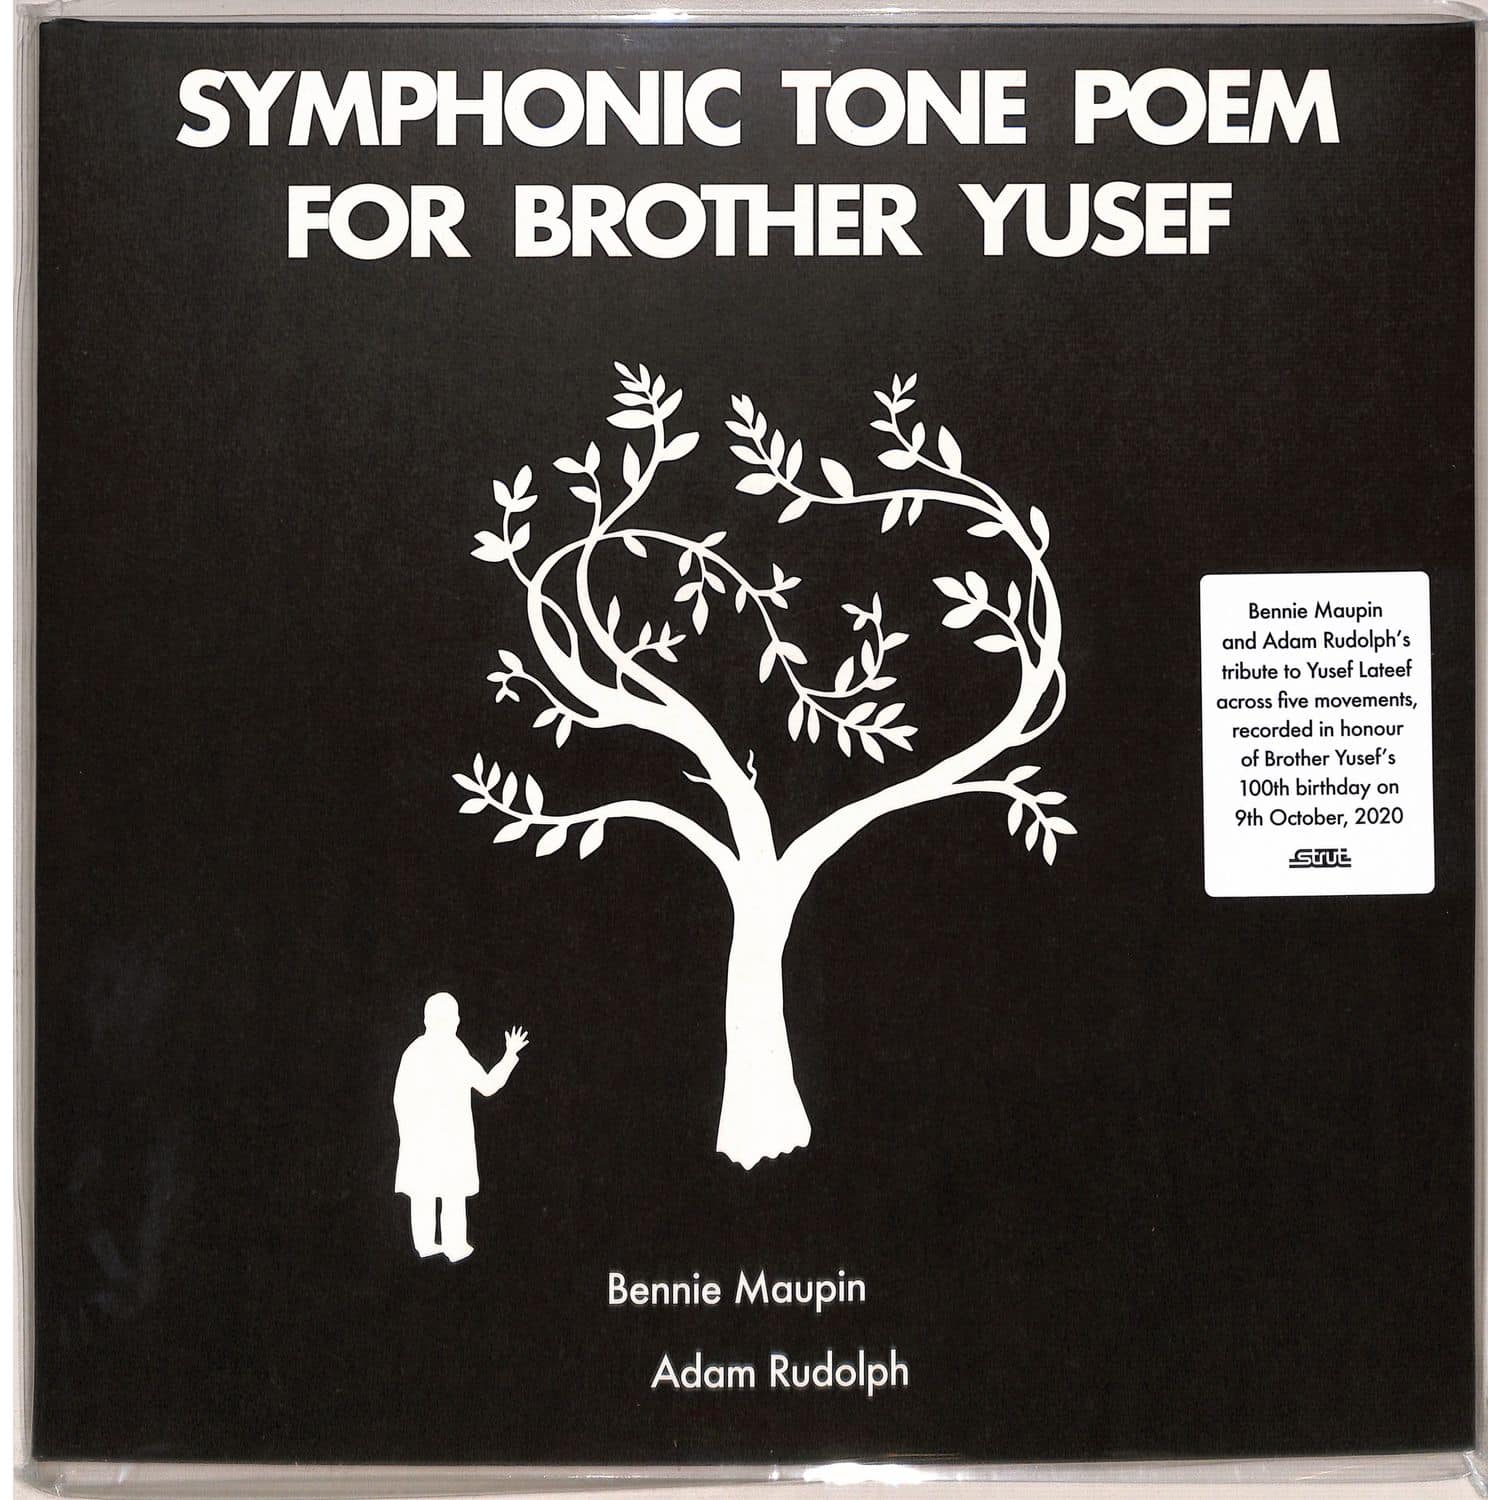 Bennie Maupin / Adam Rudolph - SYMPHONIC TONE POEM FOR BROTHER YUSEF 